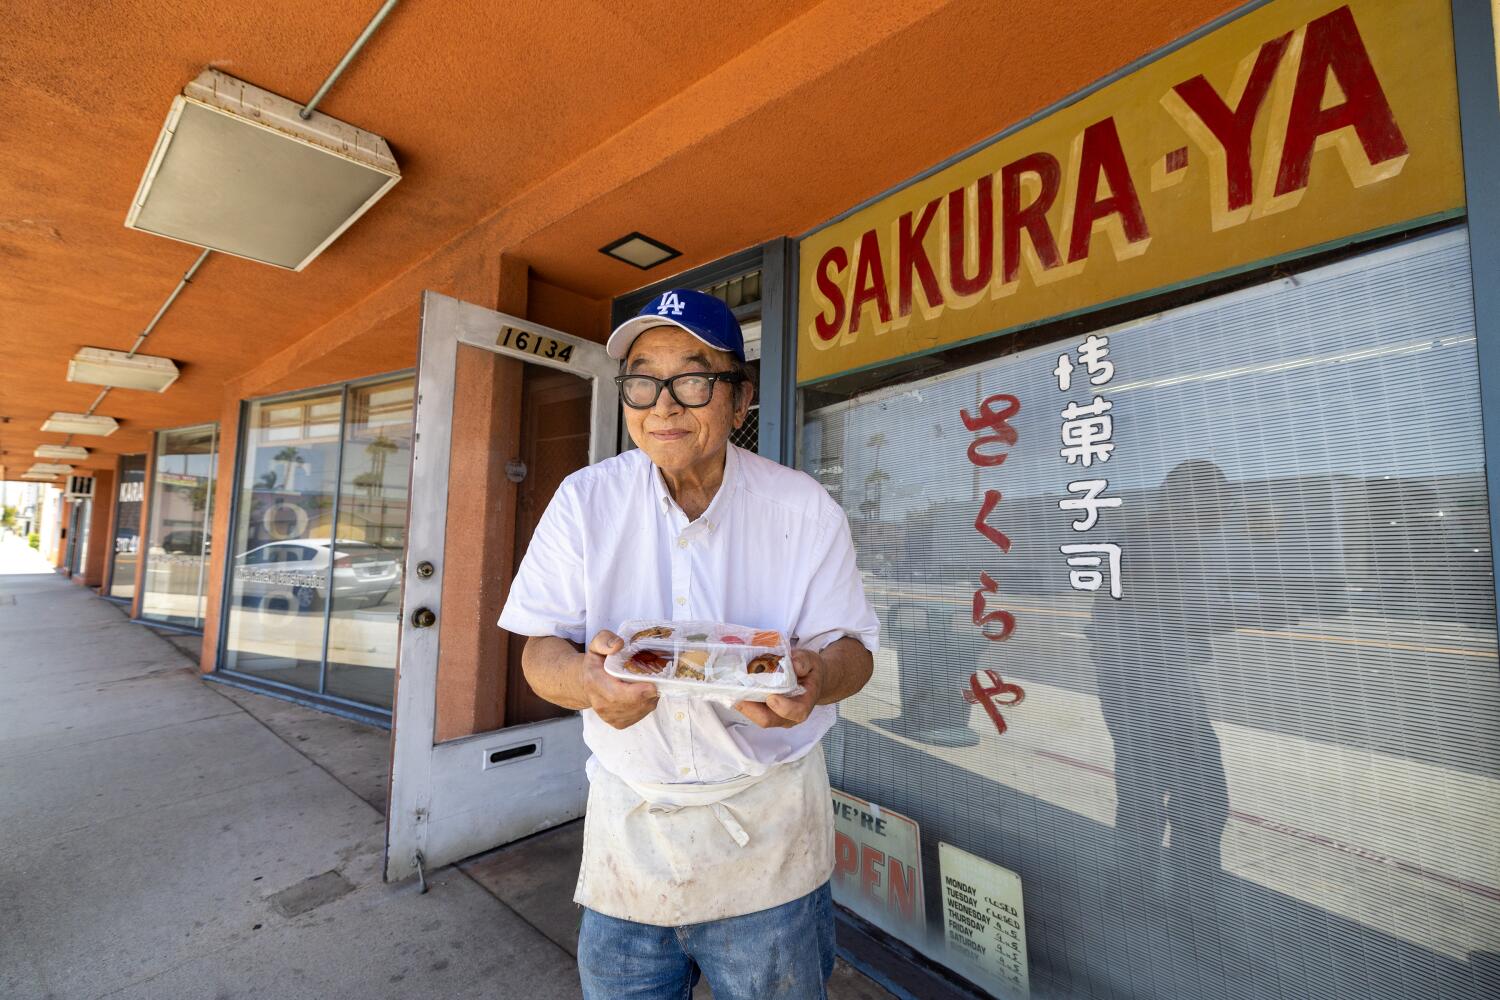 At a Gardena shop, brothers labor to create mochi that reminds people of home